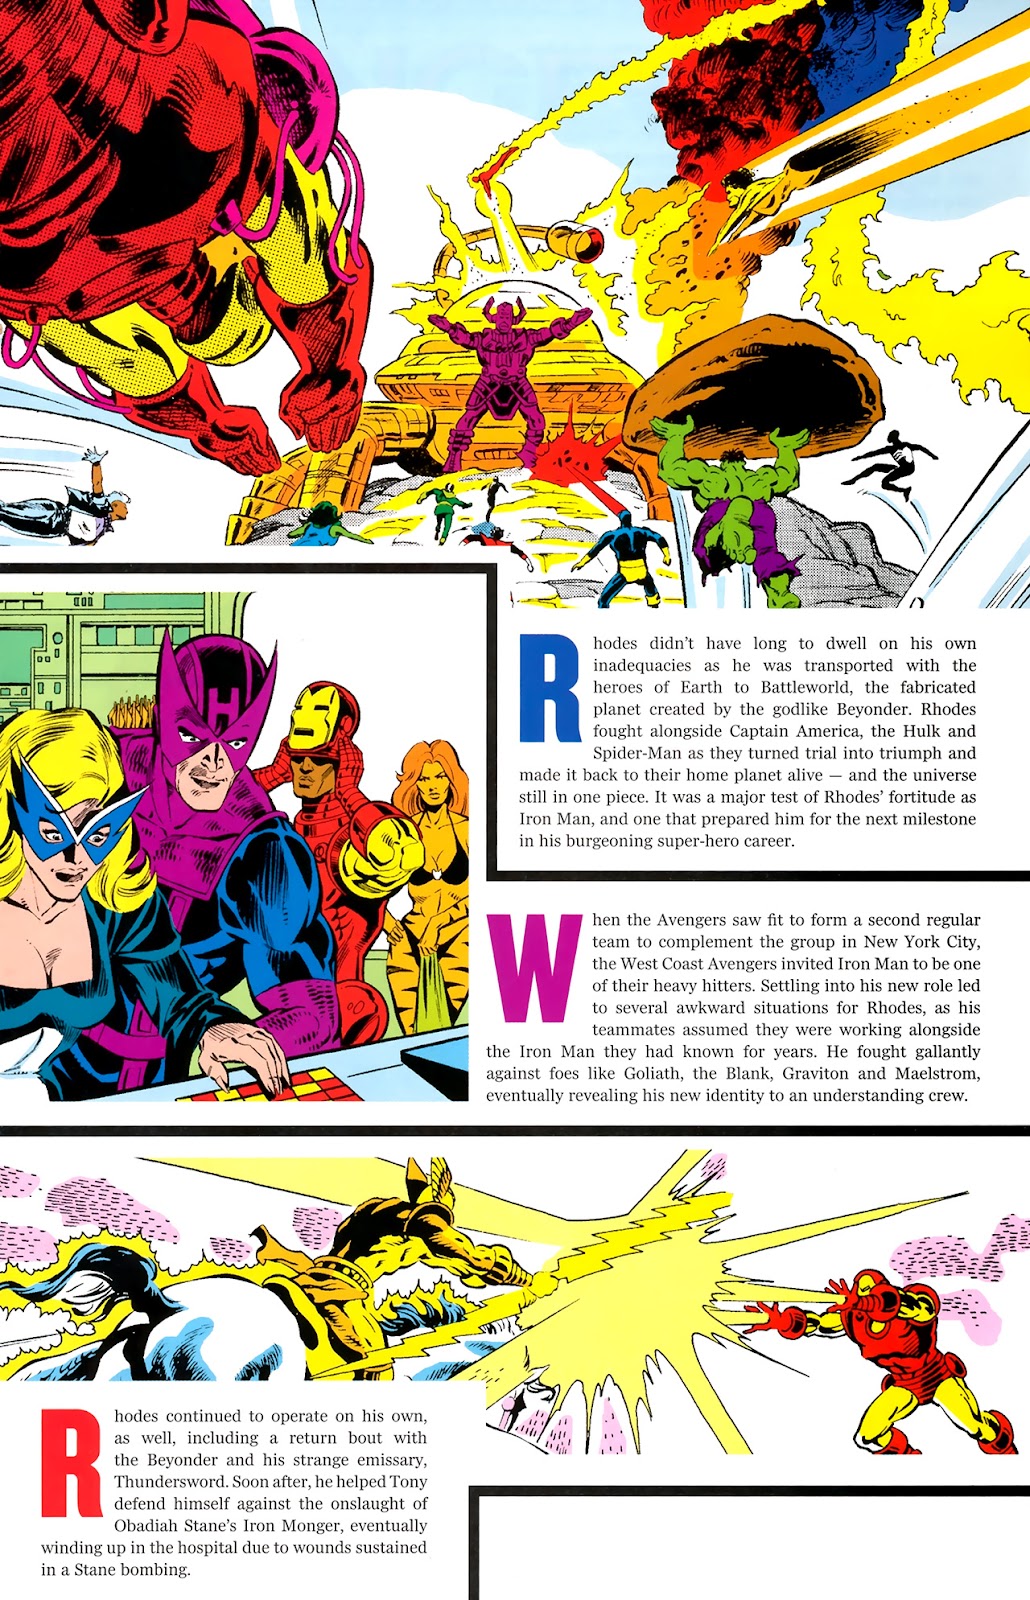 Iron Man 2.0 issue 1 - Page 28